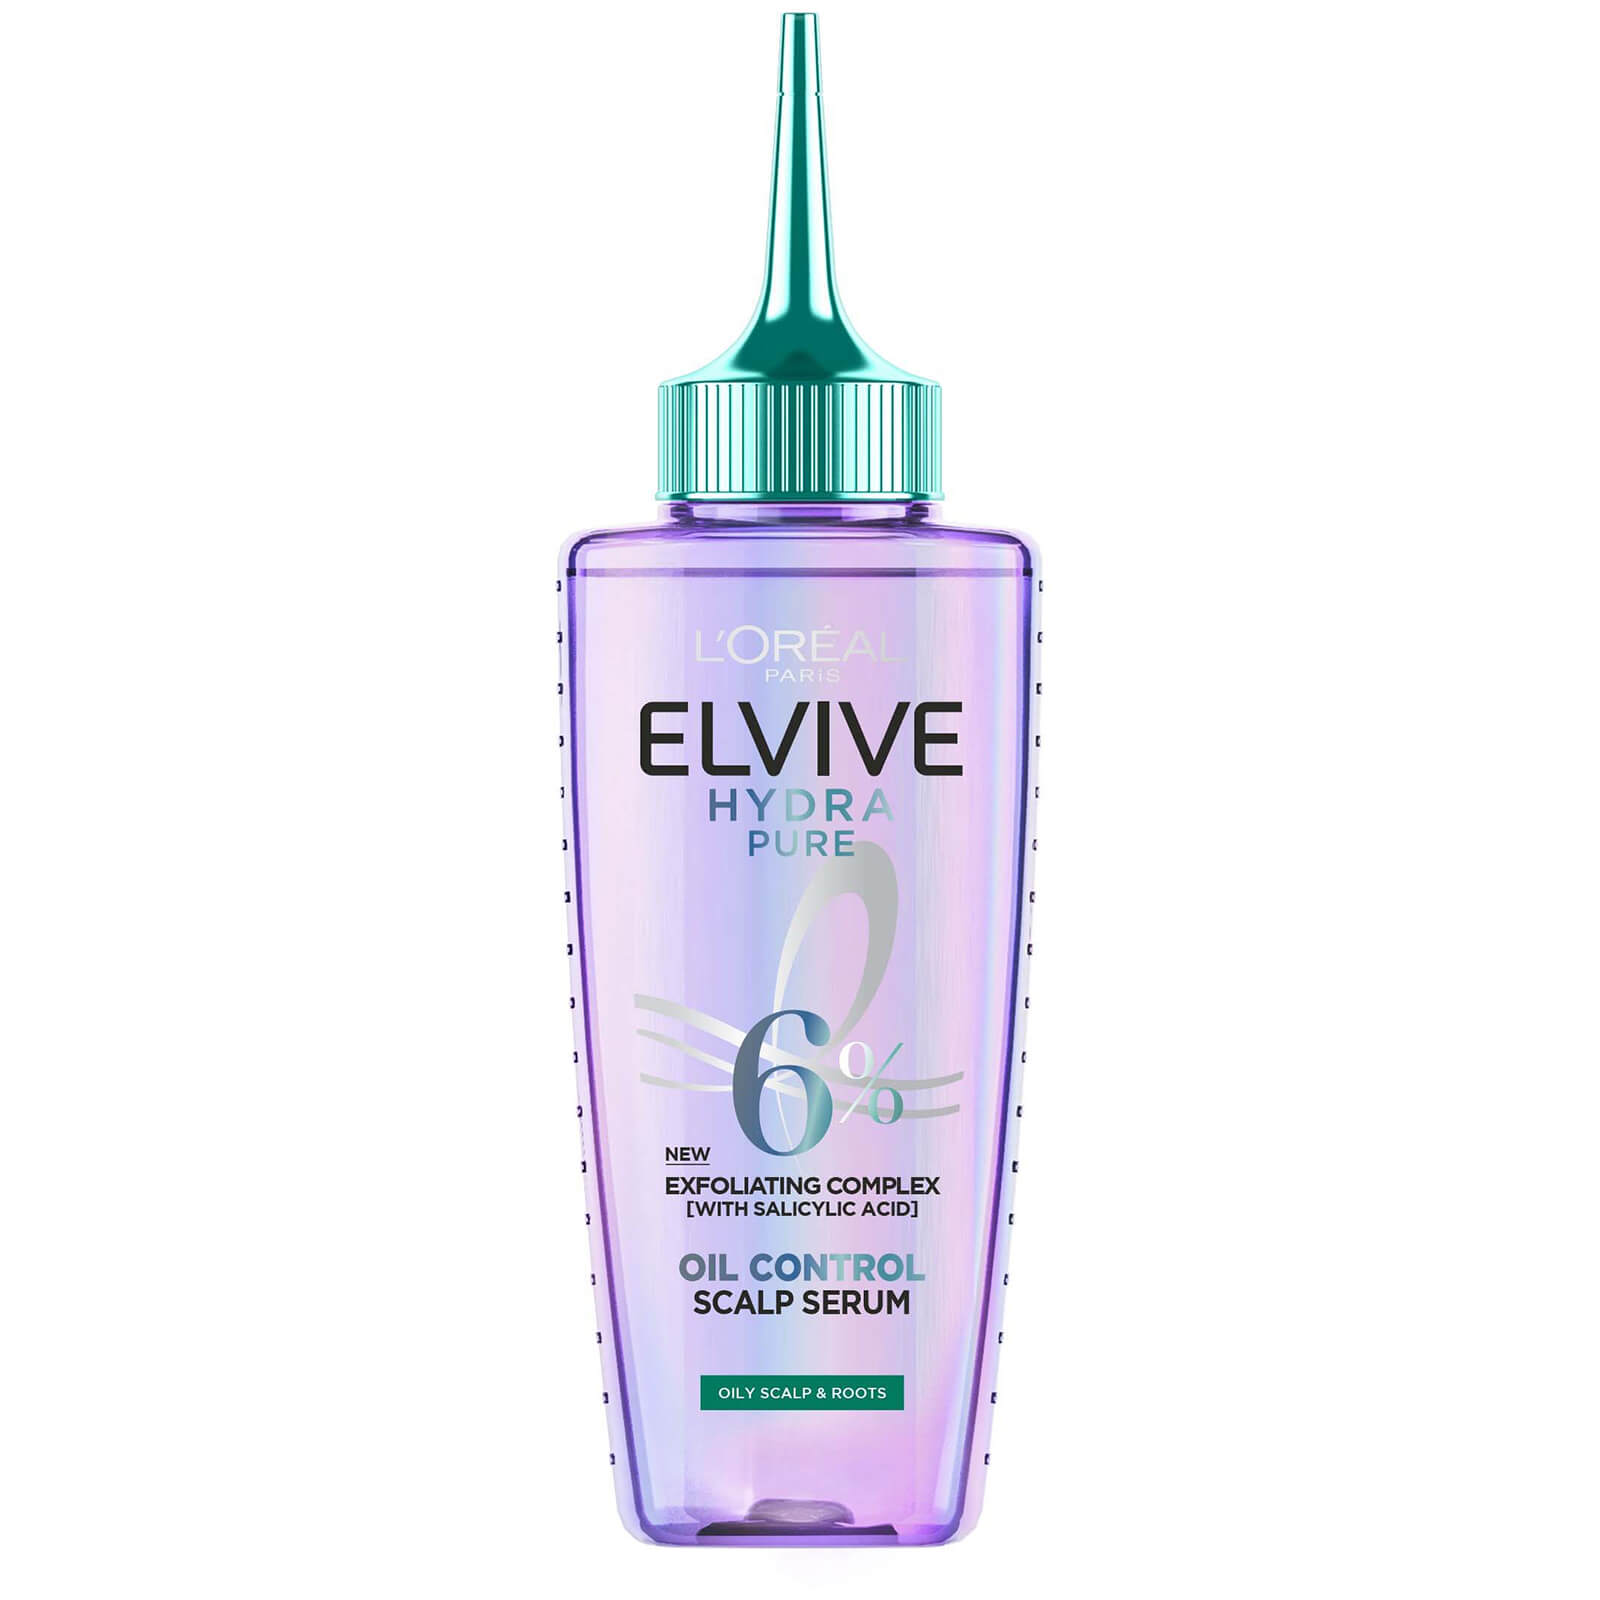 Image of L'Oréal Paris Elvive Hydra Pure Exfoliating Pre-Shampoo Scalp Serum with Salicylic Acid for Oily Scalp and Roots 102ml